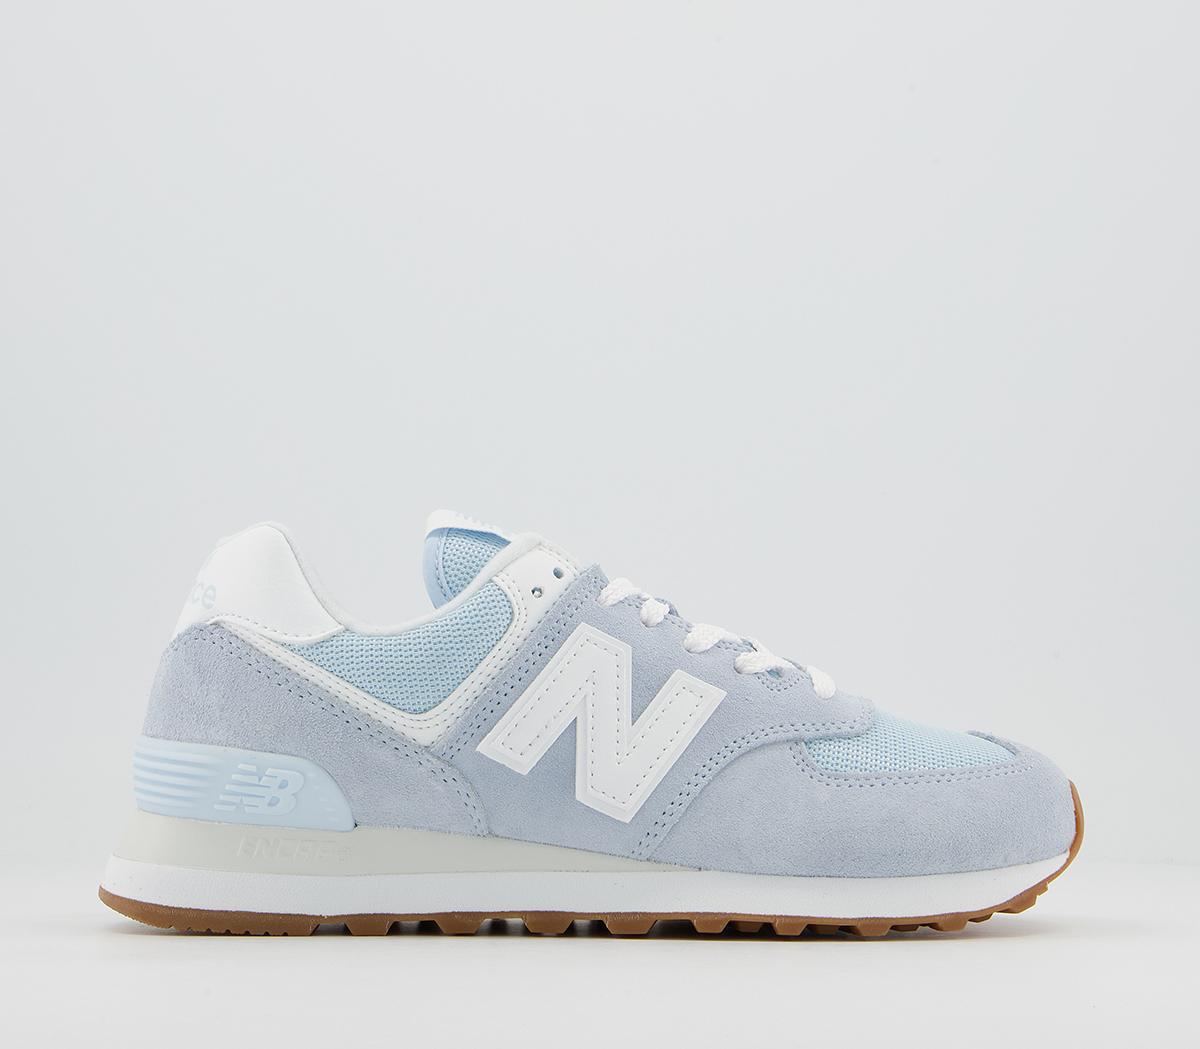 New Balance 574 Trainers Light Blue White - Women's Trainers